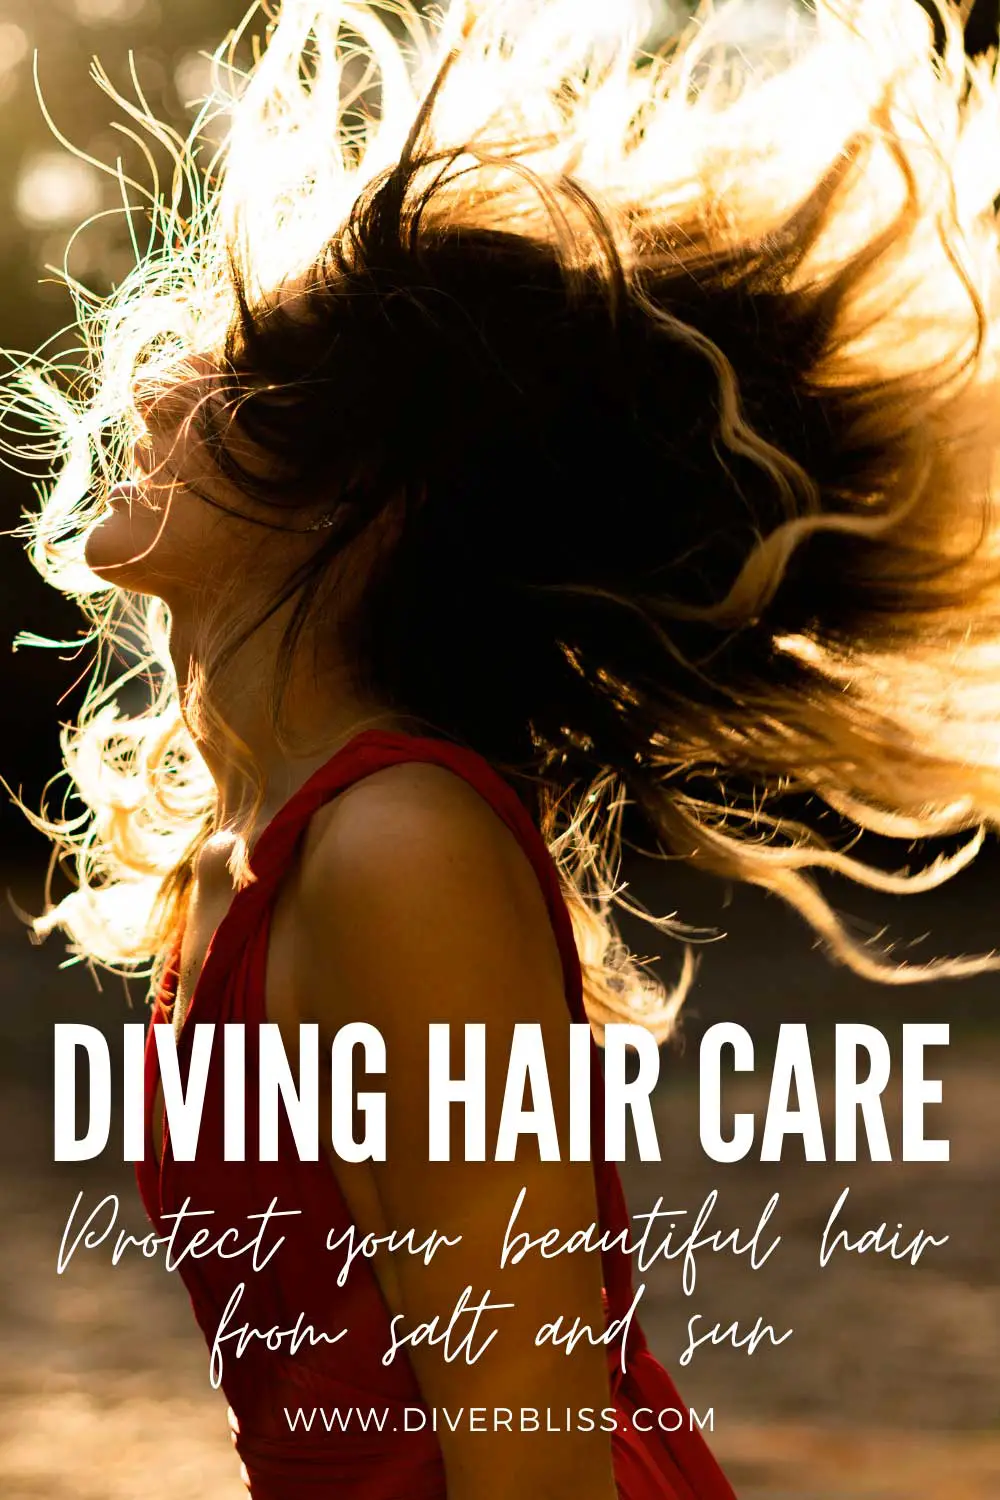 scuba diving hair care tips: protect your beautiful hair from salt and sun